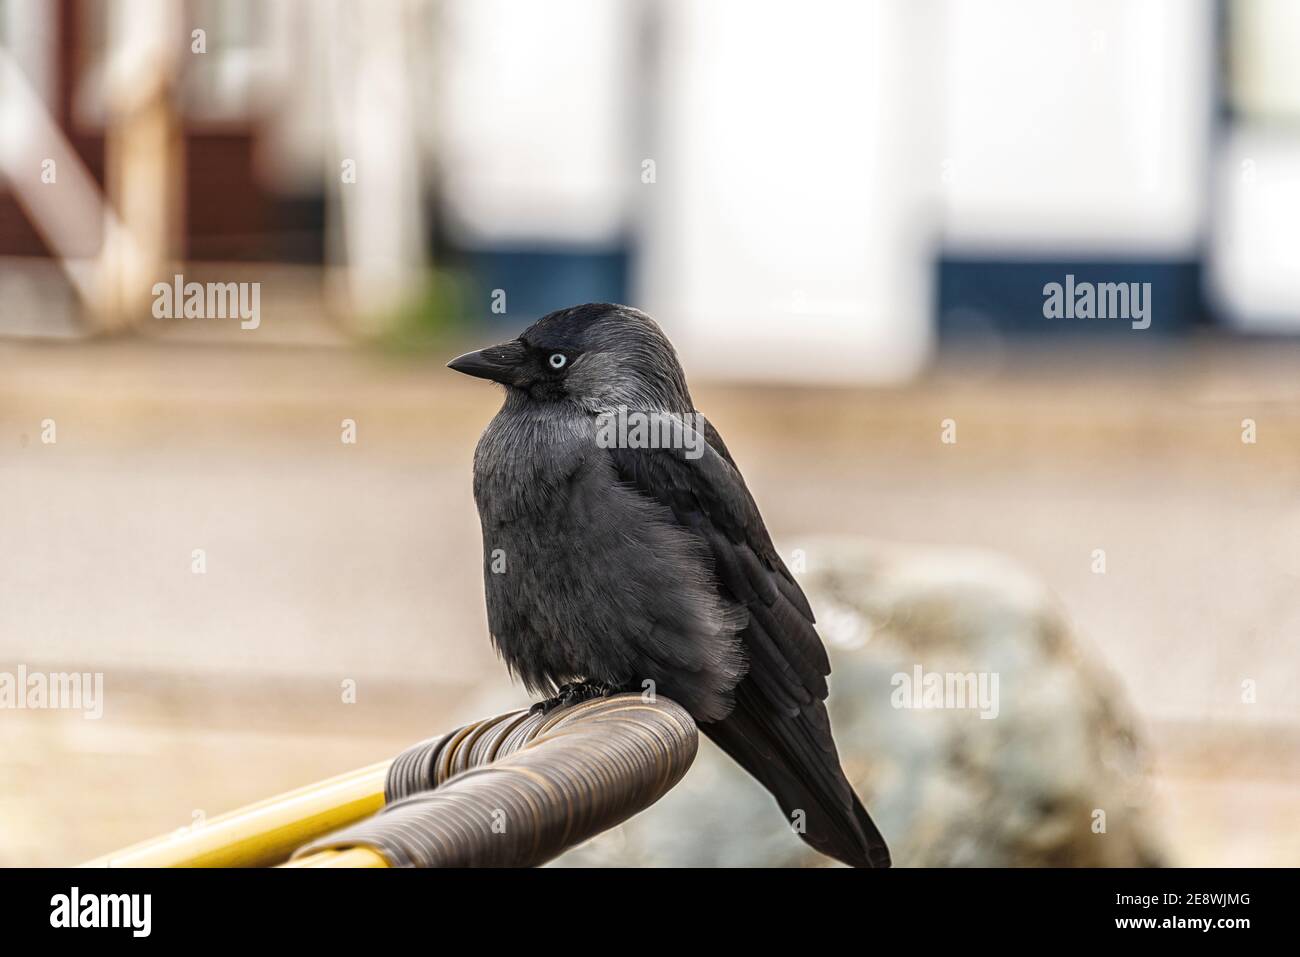 black crow sits on the edge of a wicker chair Stock Photo